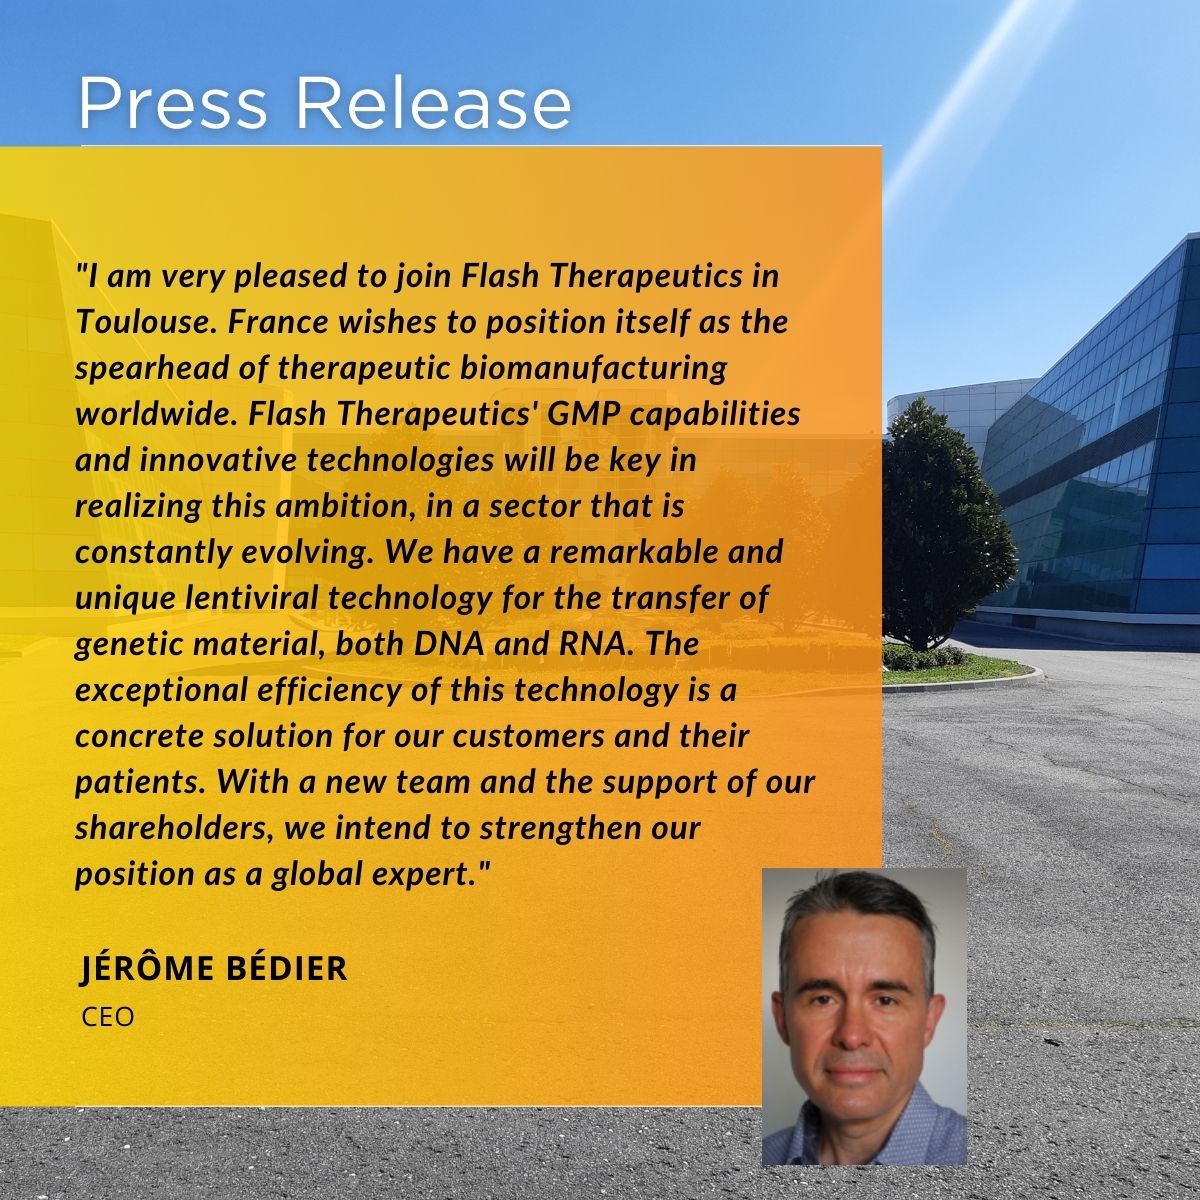 flashtherapeutics-appoints-jerome-bedier-as-president